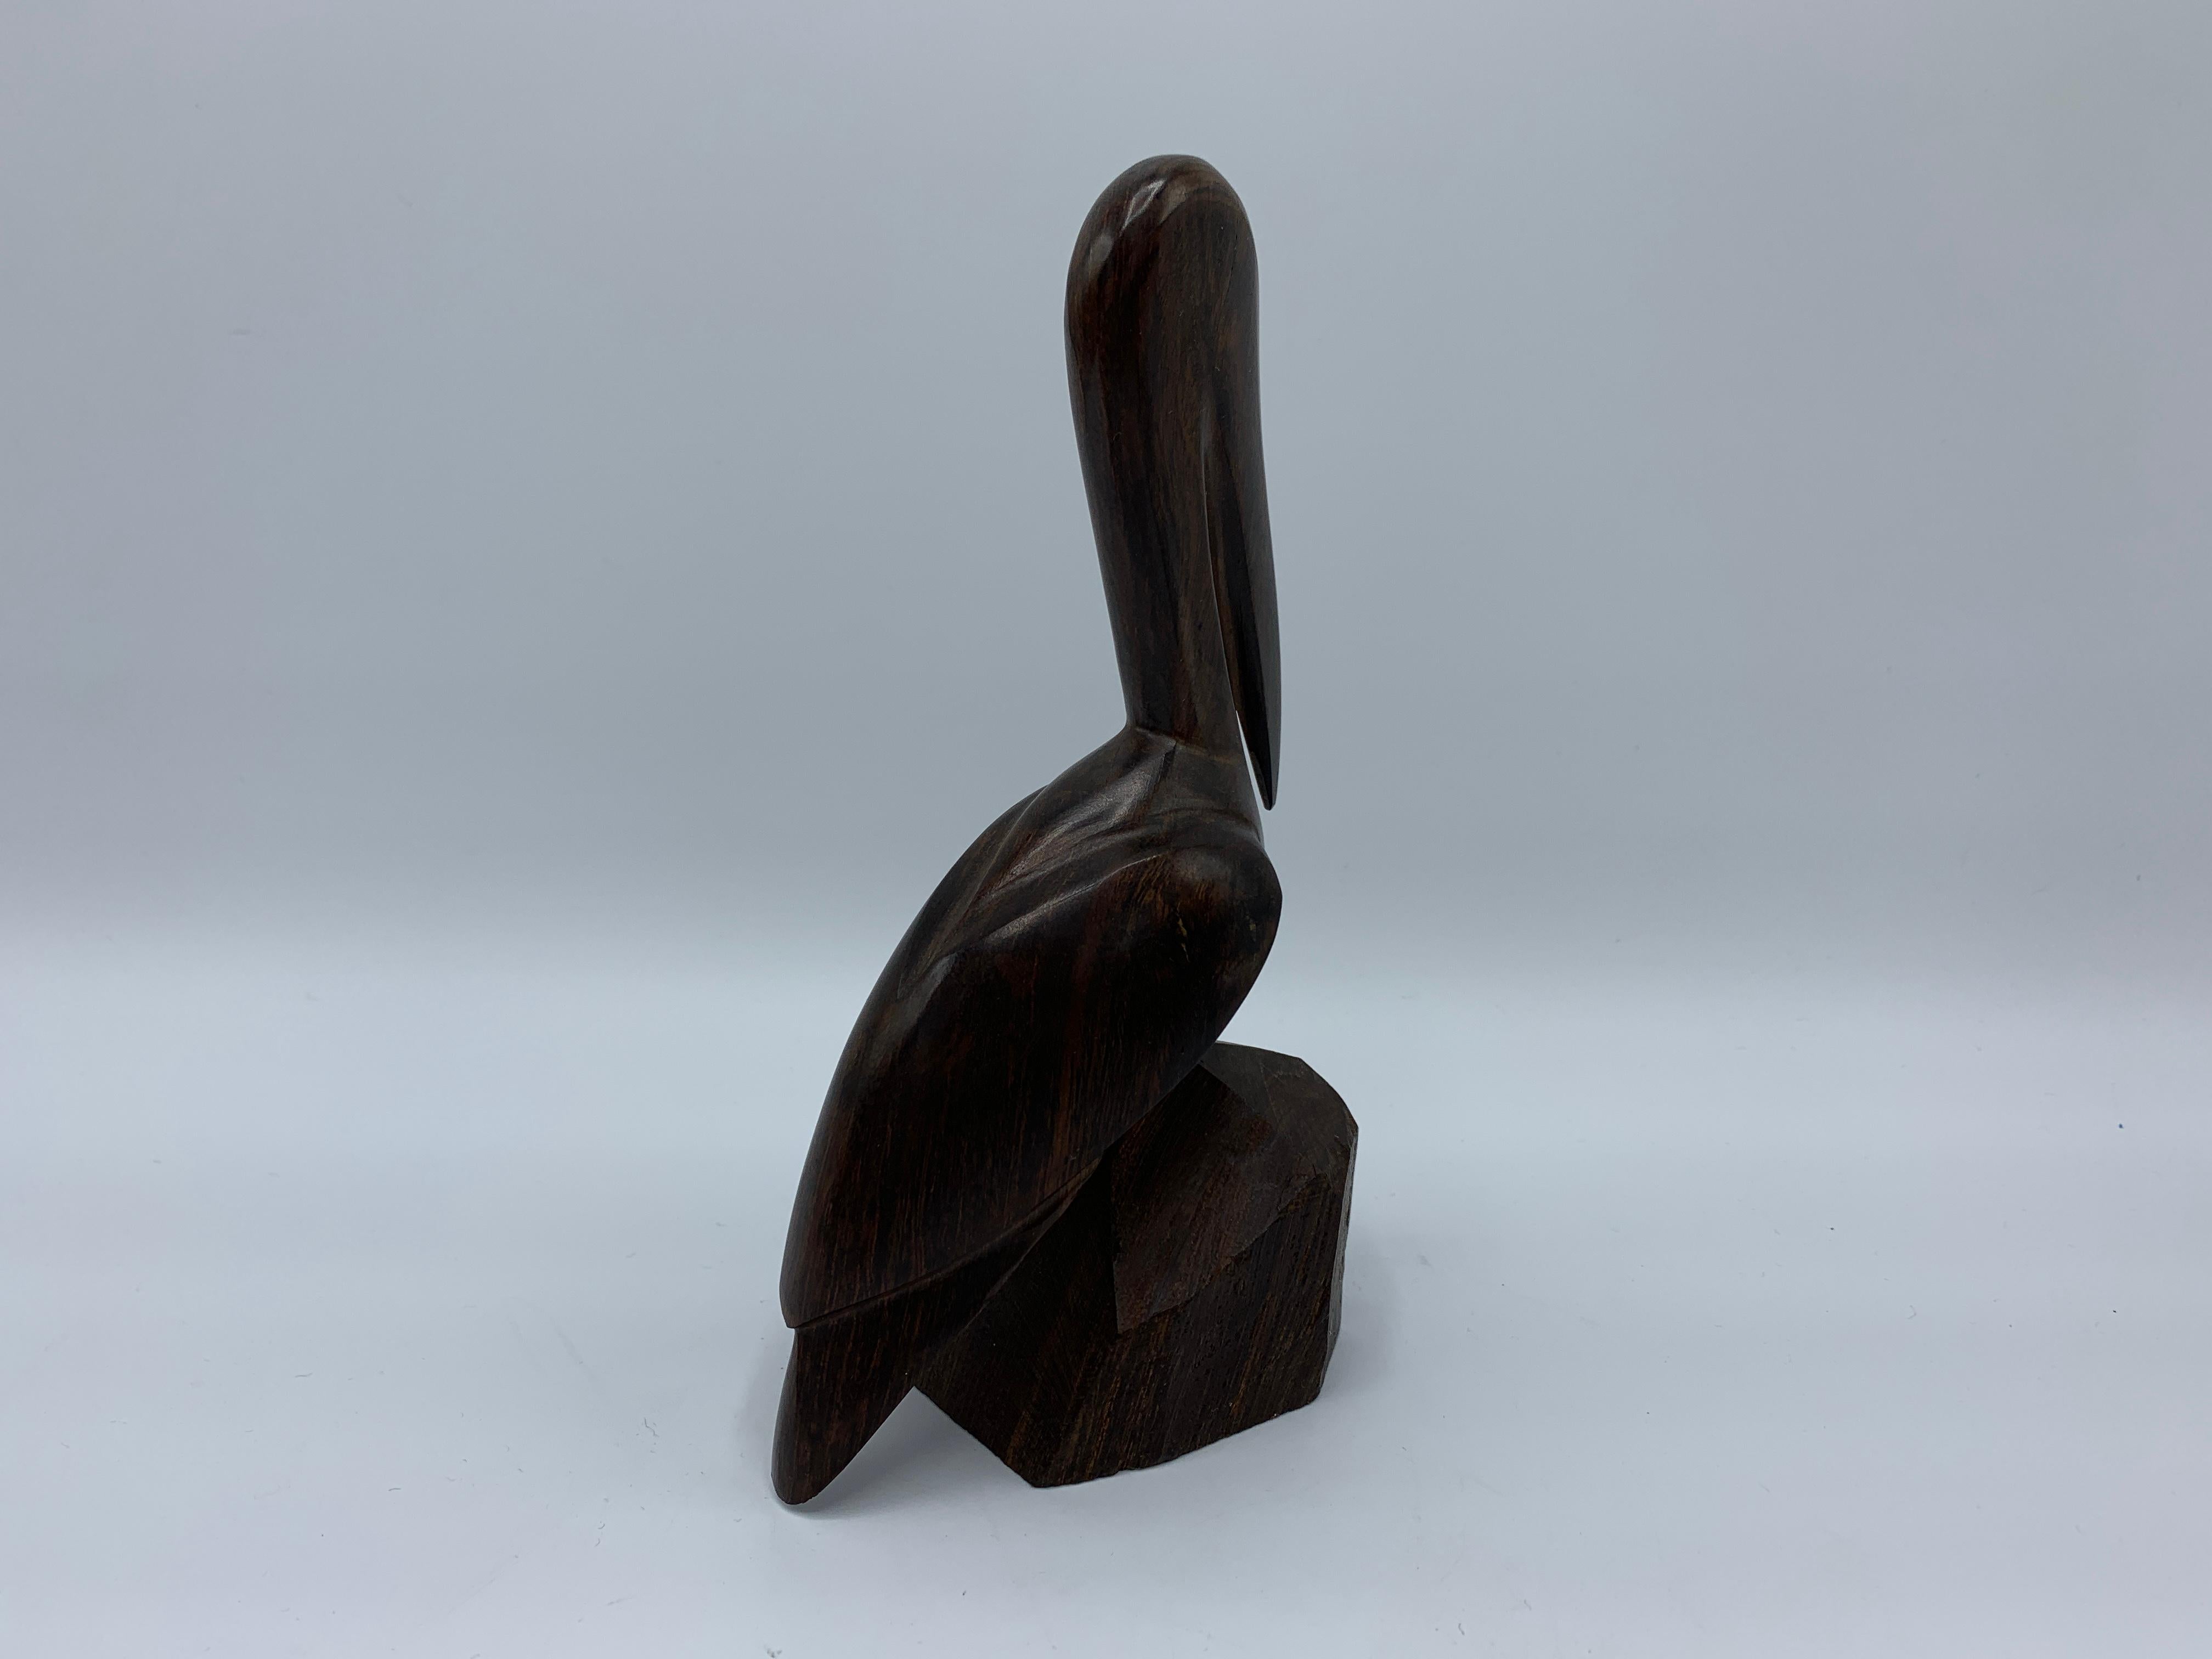 Offered is a gorgeous, hand carved, 1960s dark zebra-wood pelican sculpture. The piece has been left 'raw' along the rock shaped base that the sculpture is perched upon. We have a zebra wood road runner available as well.